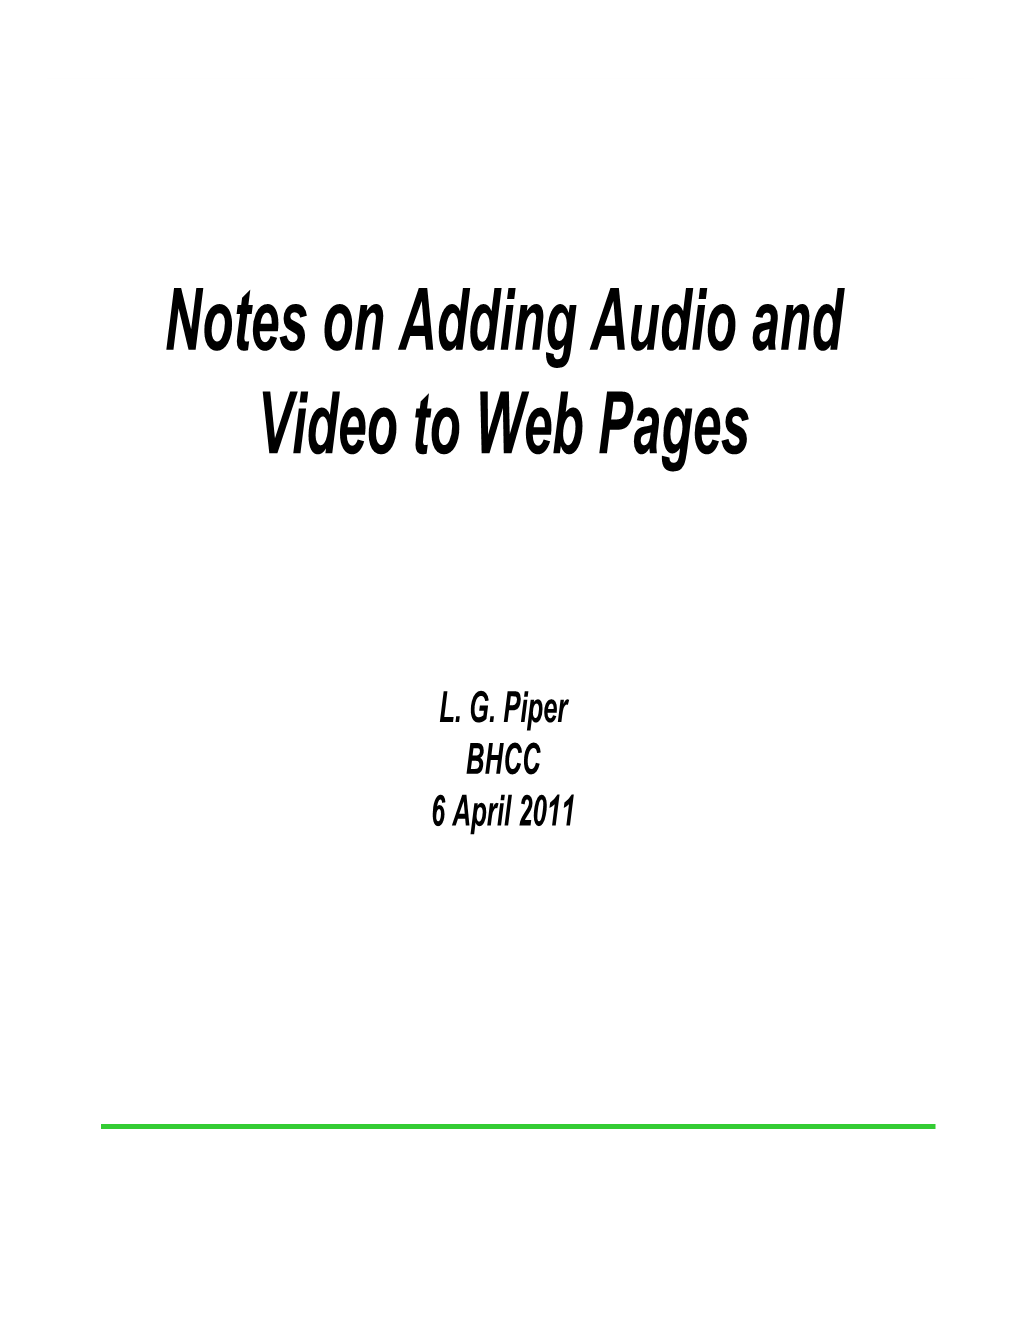 Notes on Adding Audio and Video to Web Pages